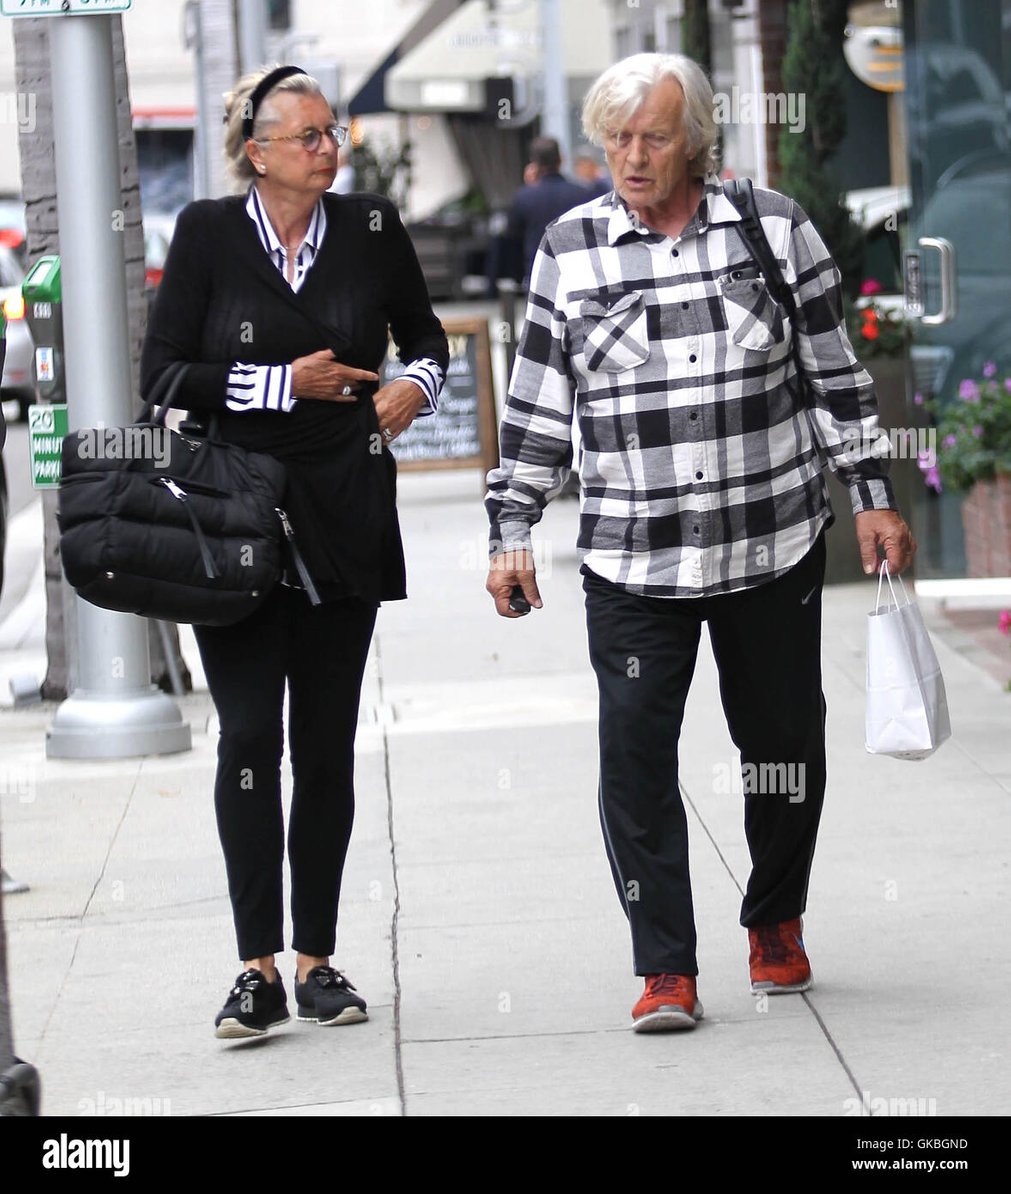 https://c8.alamy.com/comp/GKBGND/rutger-hauer-and-his-wife-go-shopping-in-beverly-hills-featuring-rutger-GKBGND.jpg